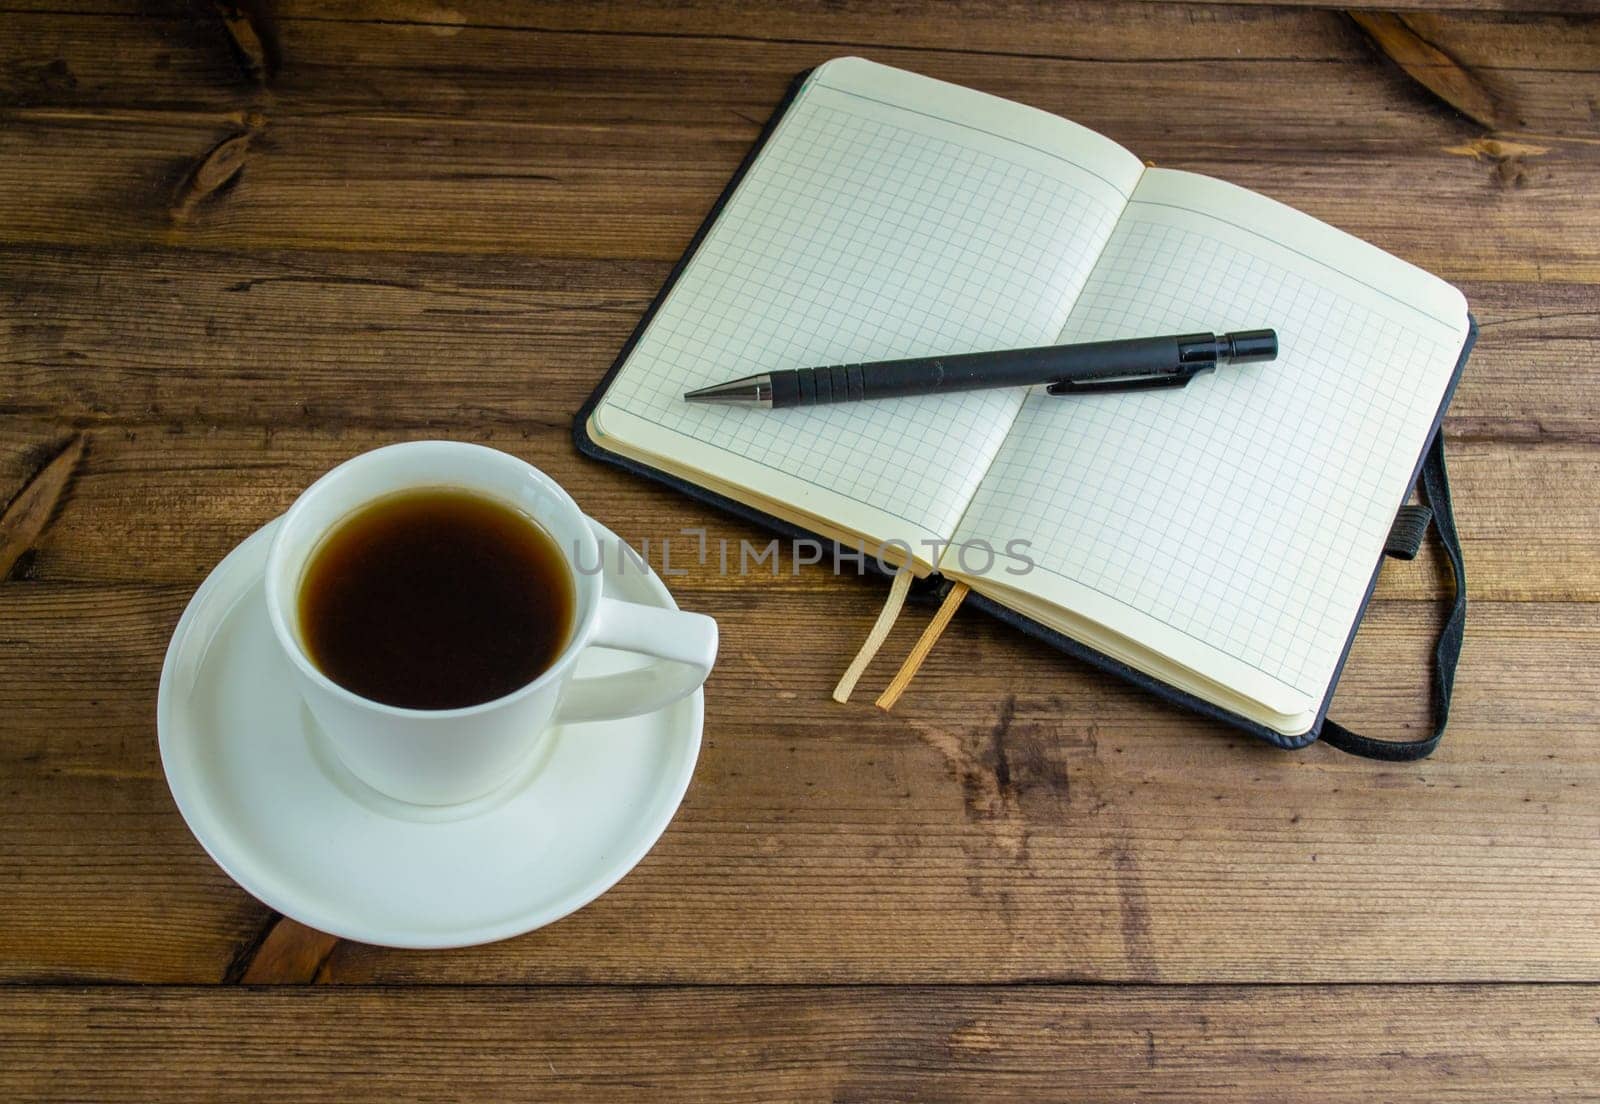 Coffee in a cup, notebook and pen. Coffee in a cup with a saucer and a notebook with a pen on a wooden table.